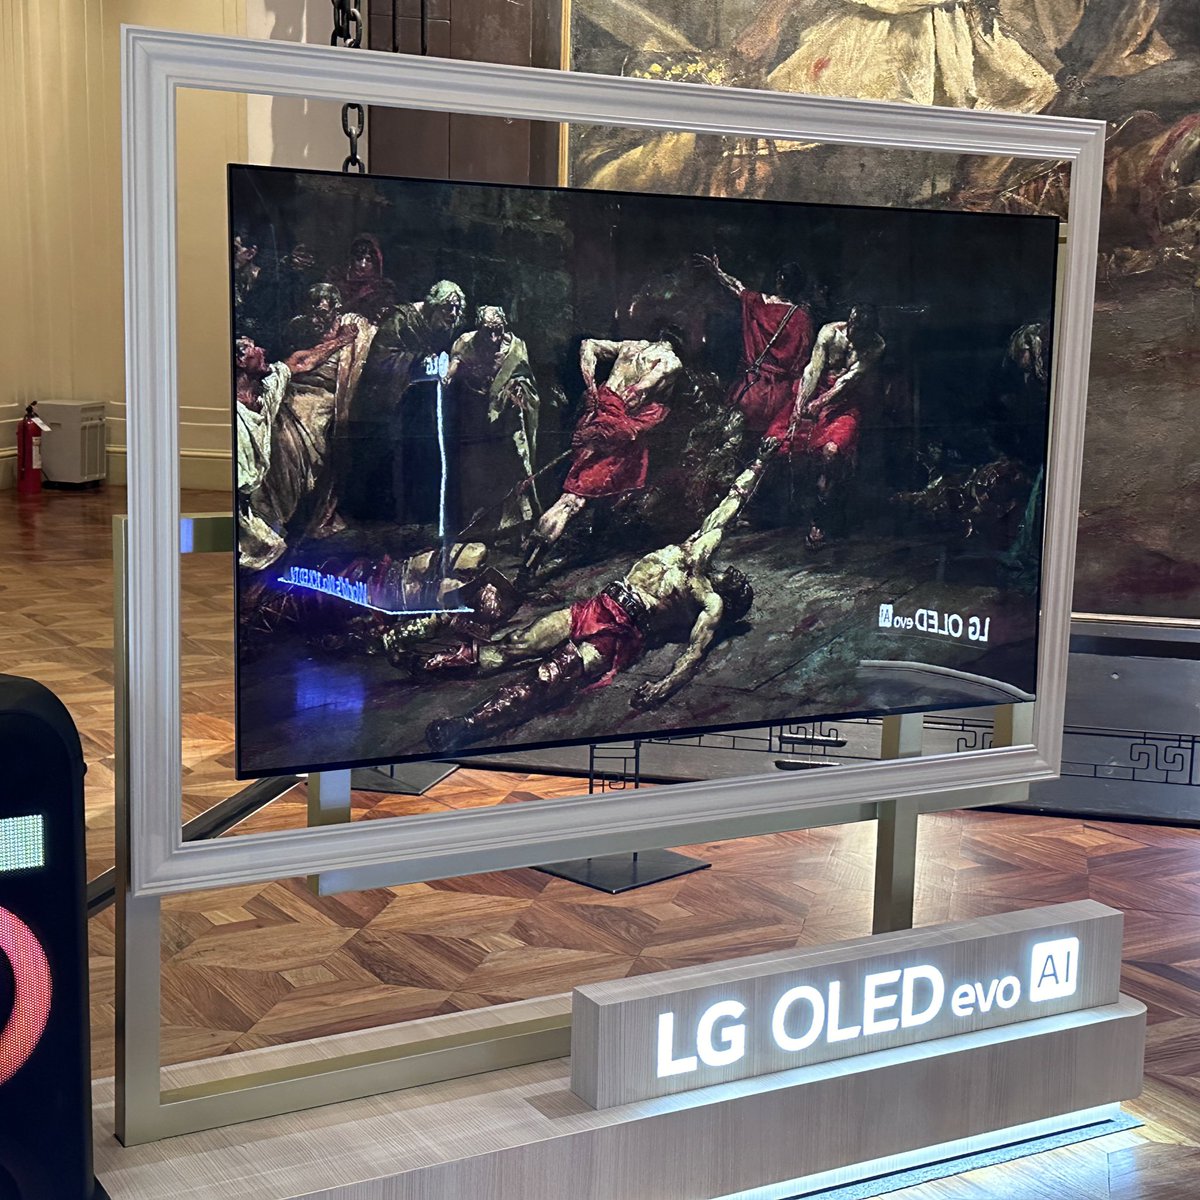 At the National Museum of Fine Arts for the colab project with @lgphilippines. Also launching of the LG Oled evo AI featuring its canvas like display and highlighting the brilliant and vivid images. #Lifesgood #Spoliarium #LGOledSmartLife #NationalMuseumPH